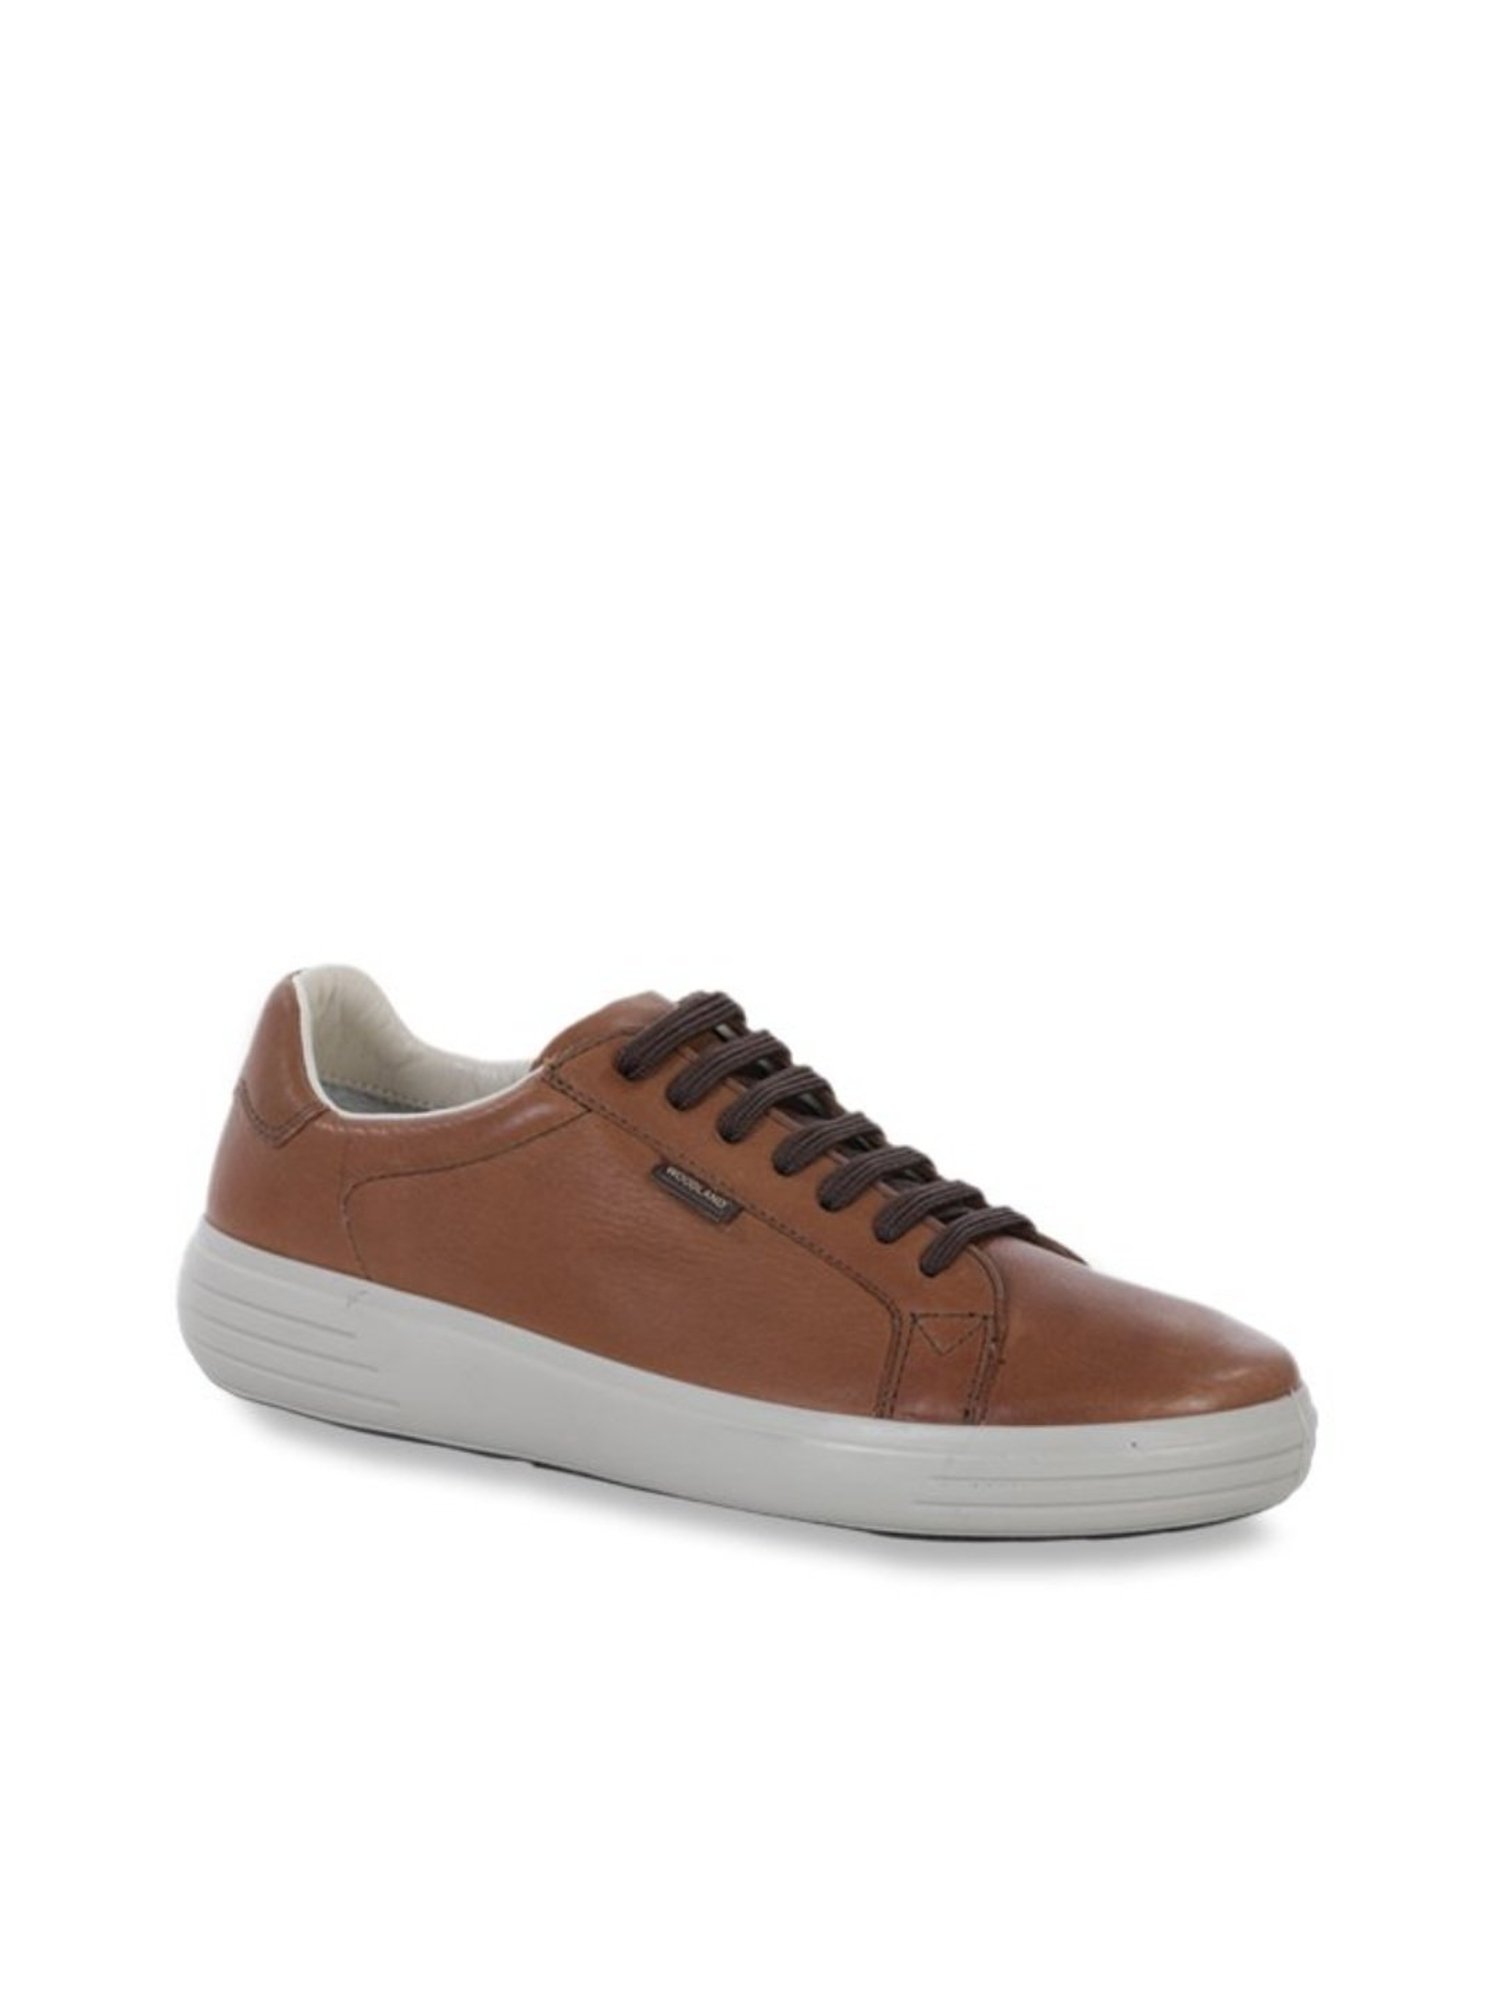 Buy Woodland Men's Rust Brown Leather Casual Shoe-6 UK (40 EU) (GC  2509117WS) at Amazon.in